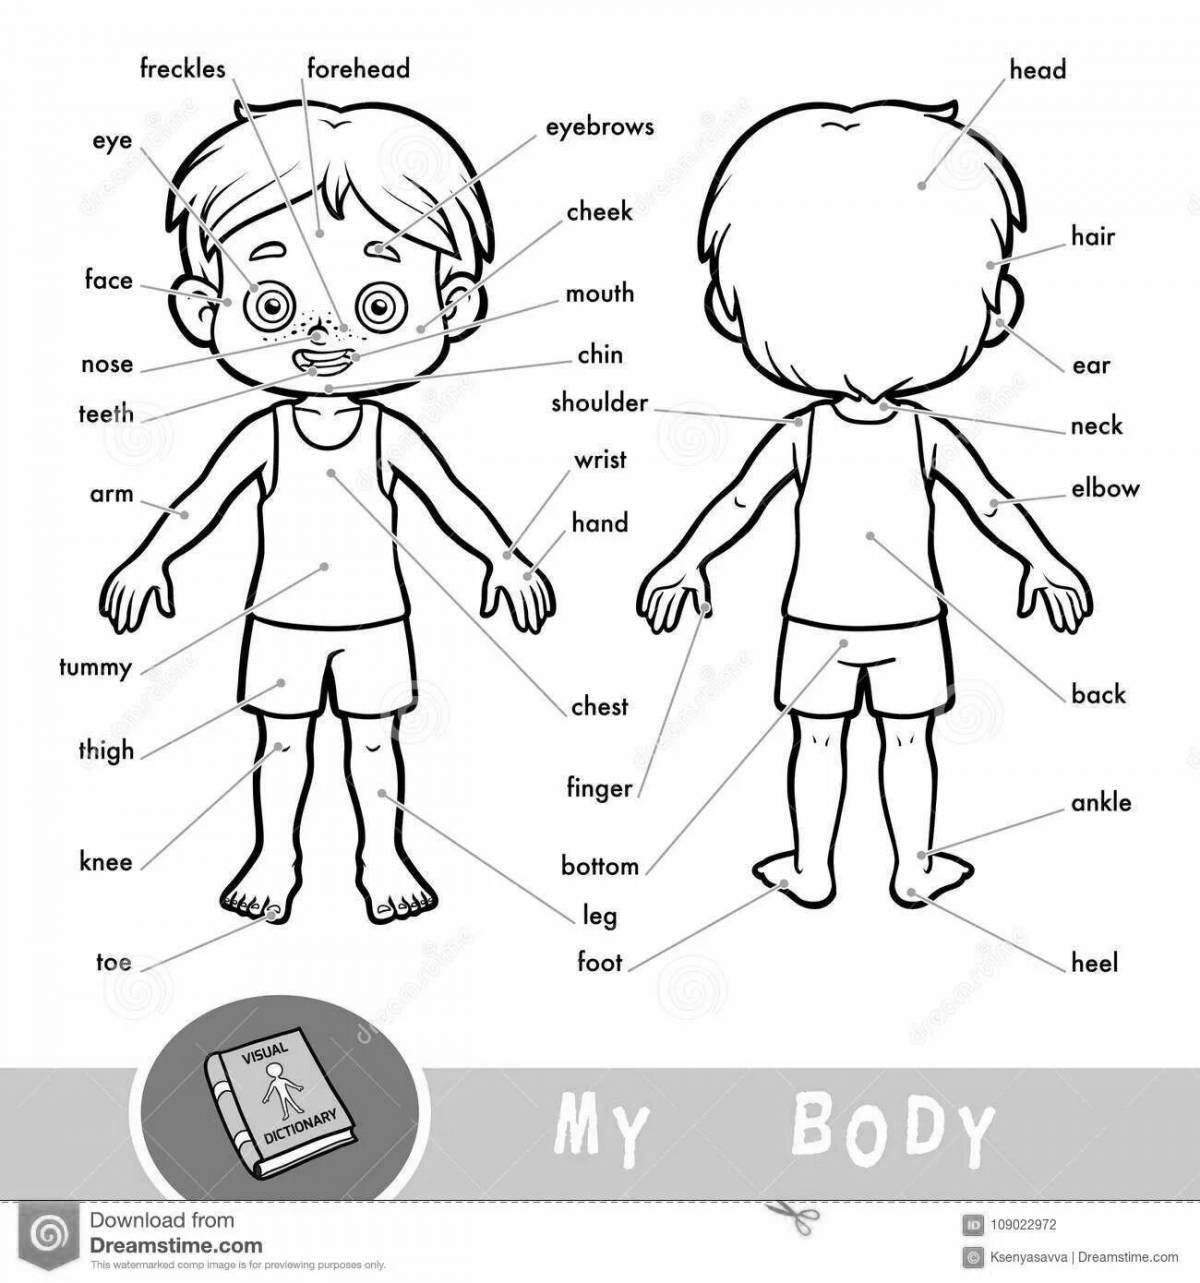 Body parts in english for kids #14